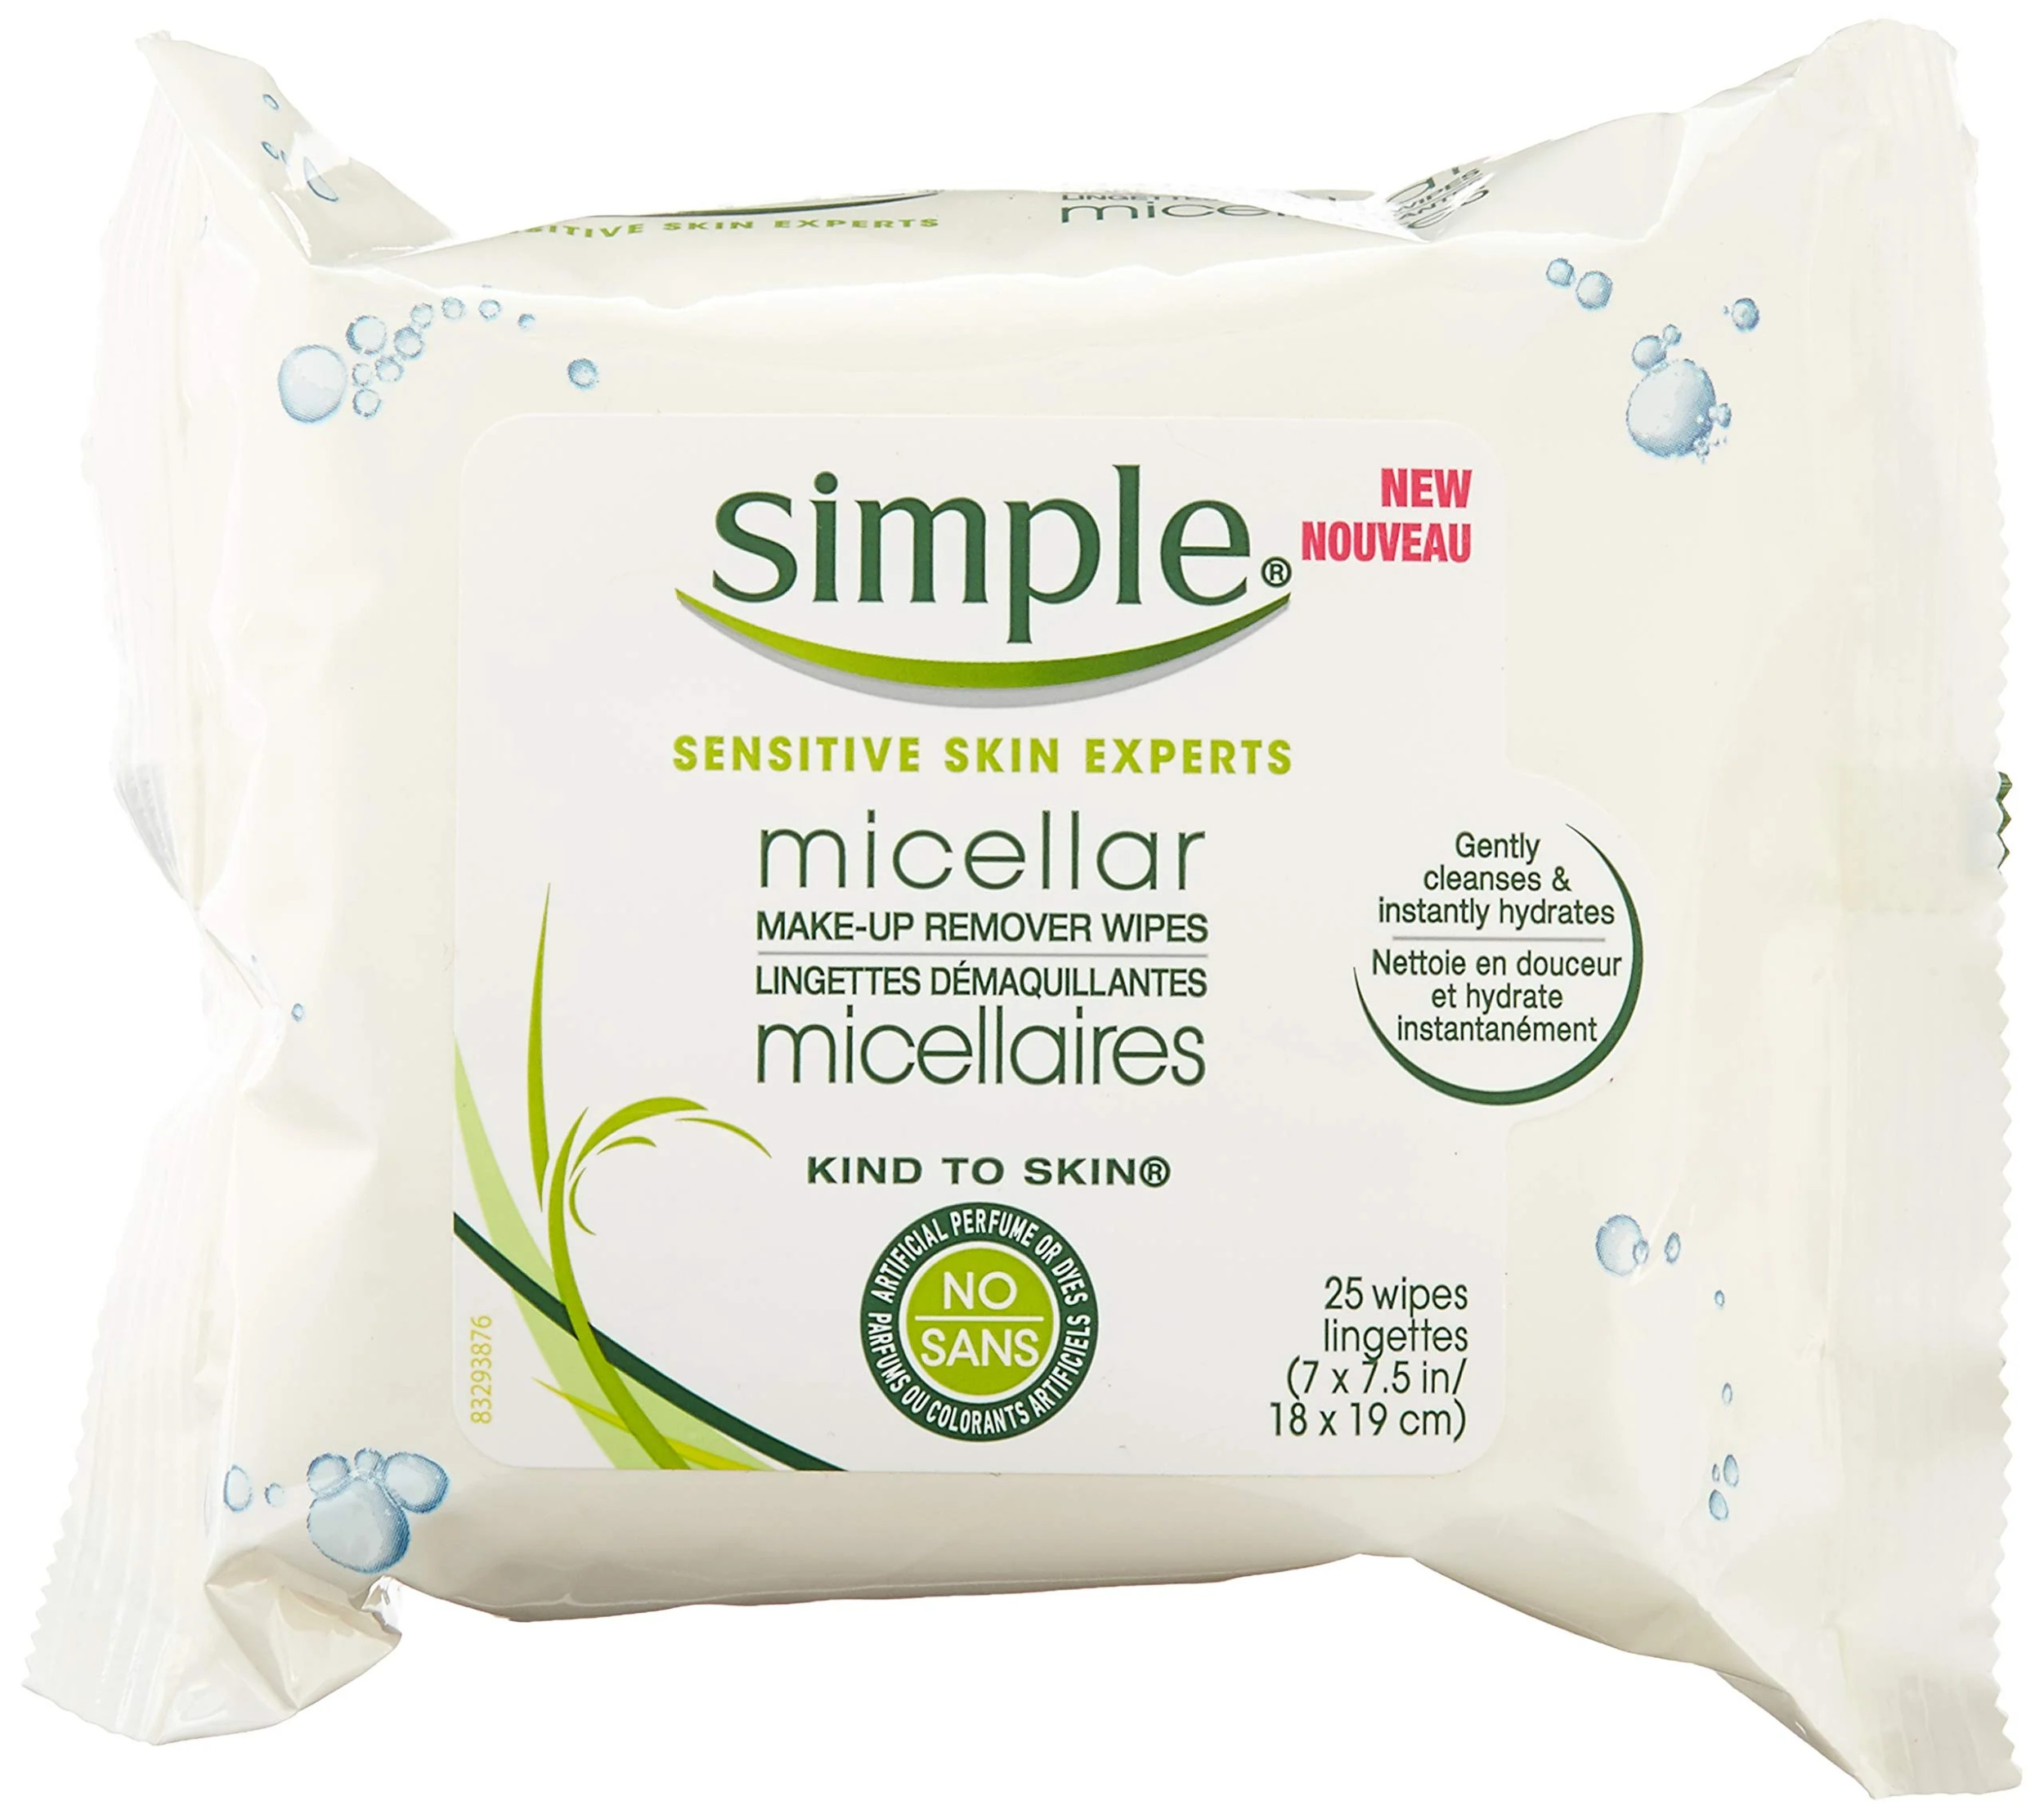 Simple Facial Wipes Micellar, 25 Count (Pack of 6) - image 1 of 4